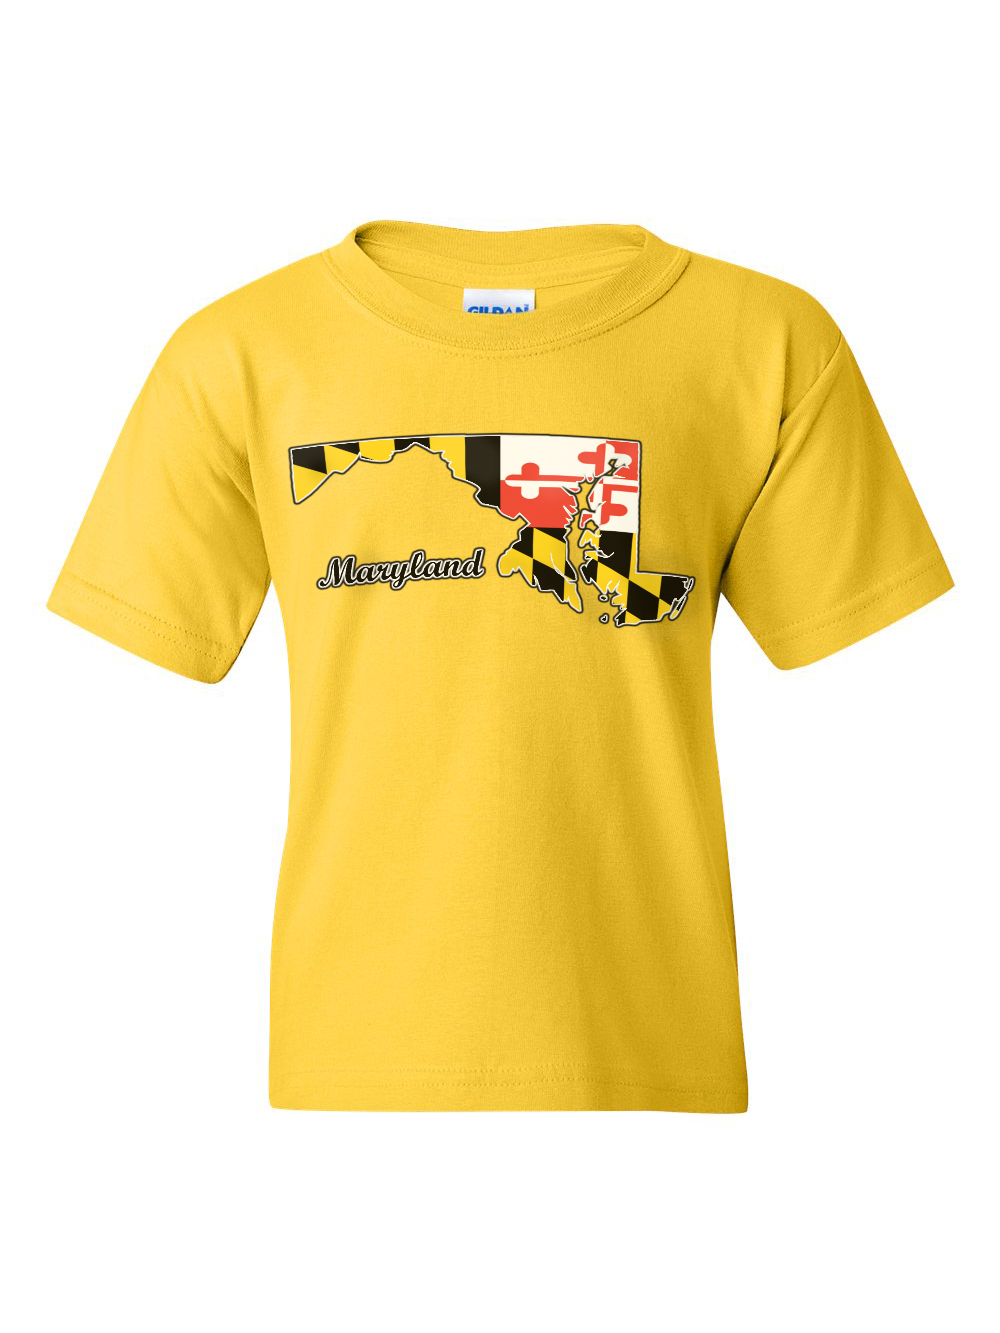 Maryland Flag State Silhouette Youth T-Shirt (Yellow)